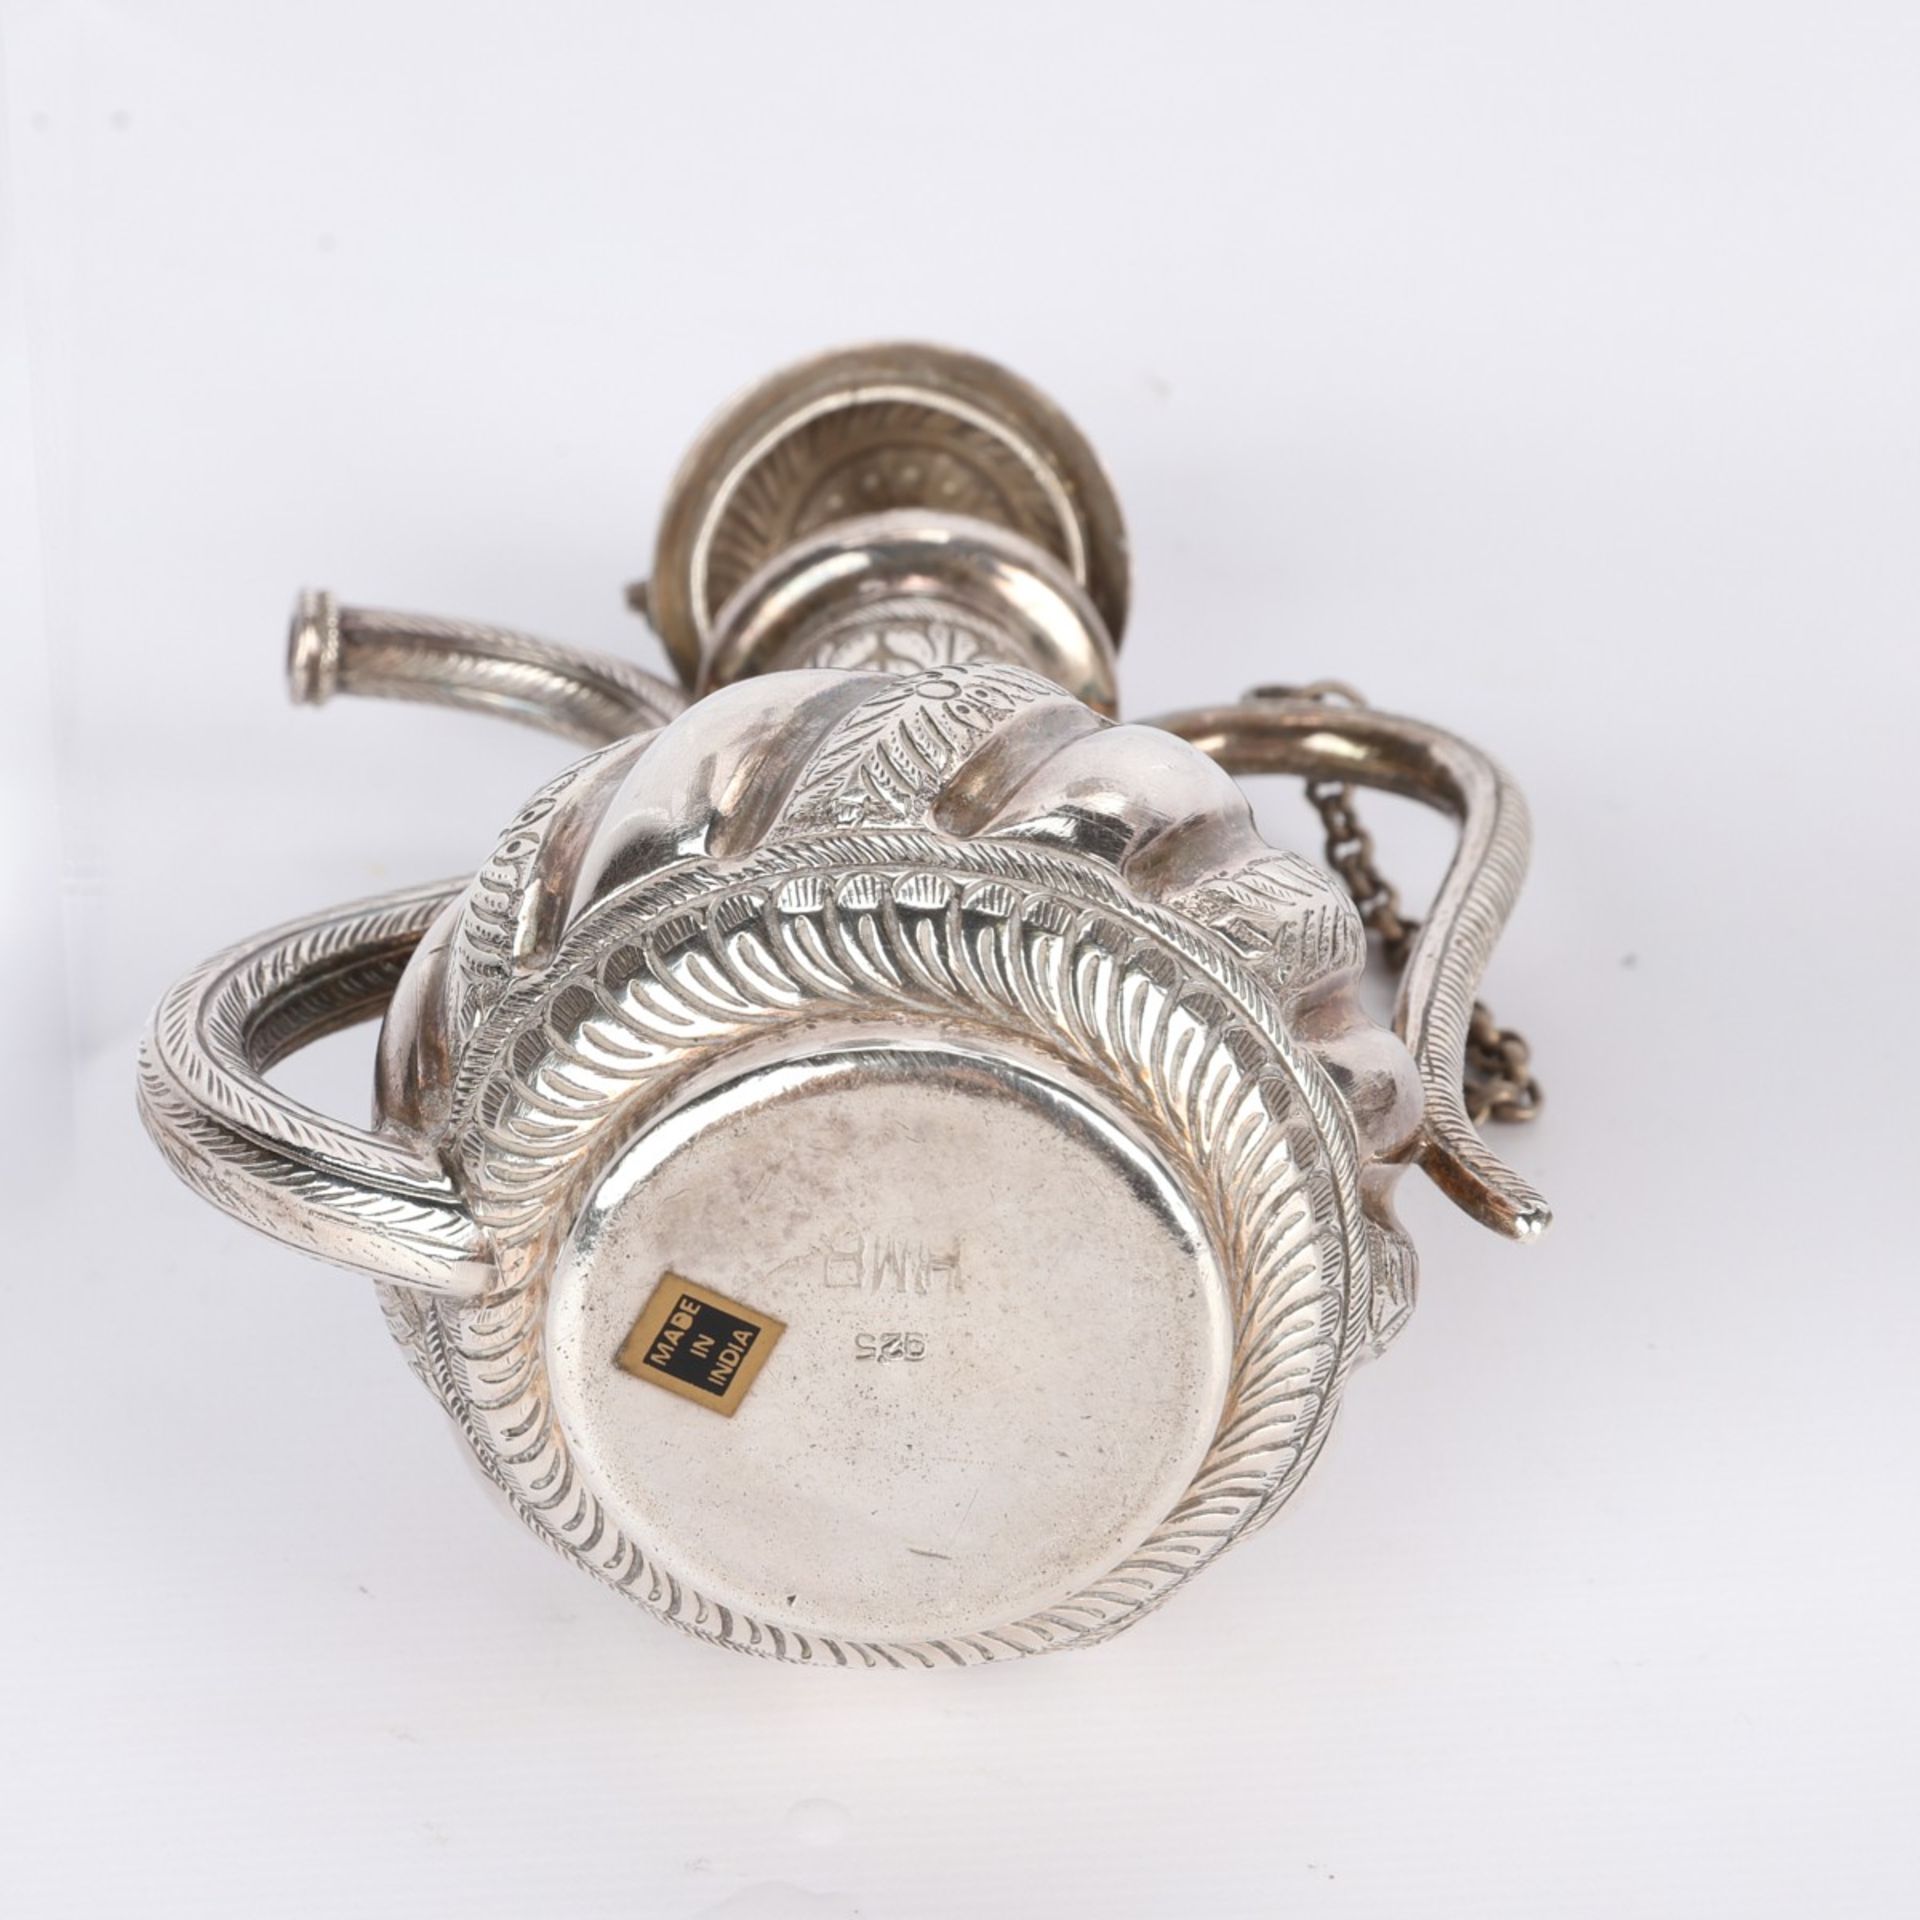 7 Miniature Silver and Sterling Indian Objects - Image 8 of 13